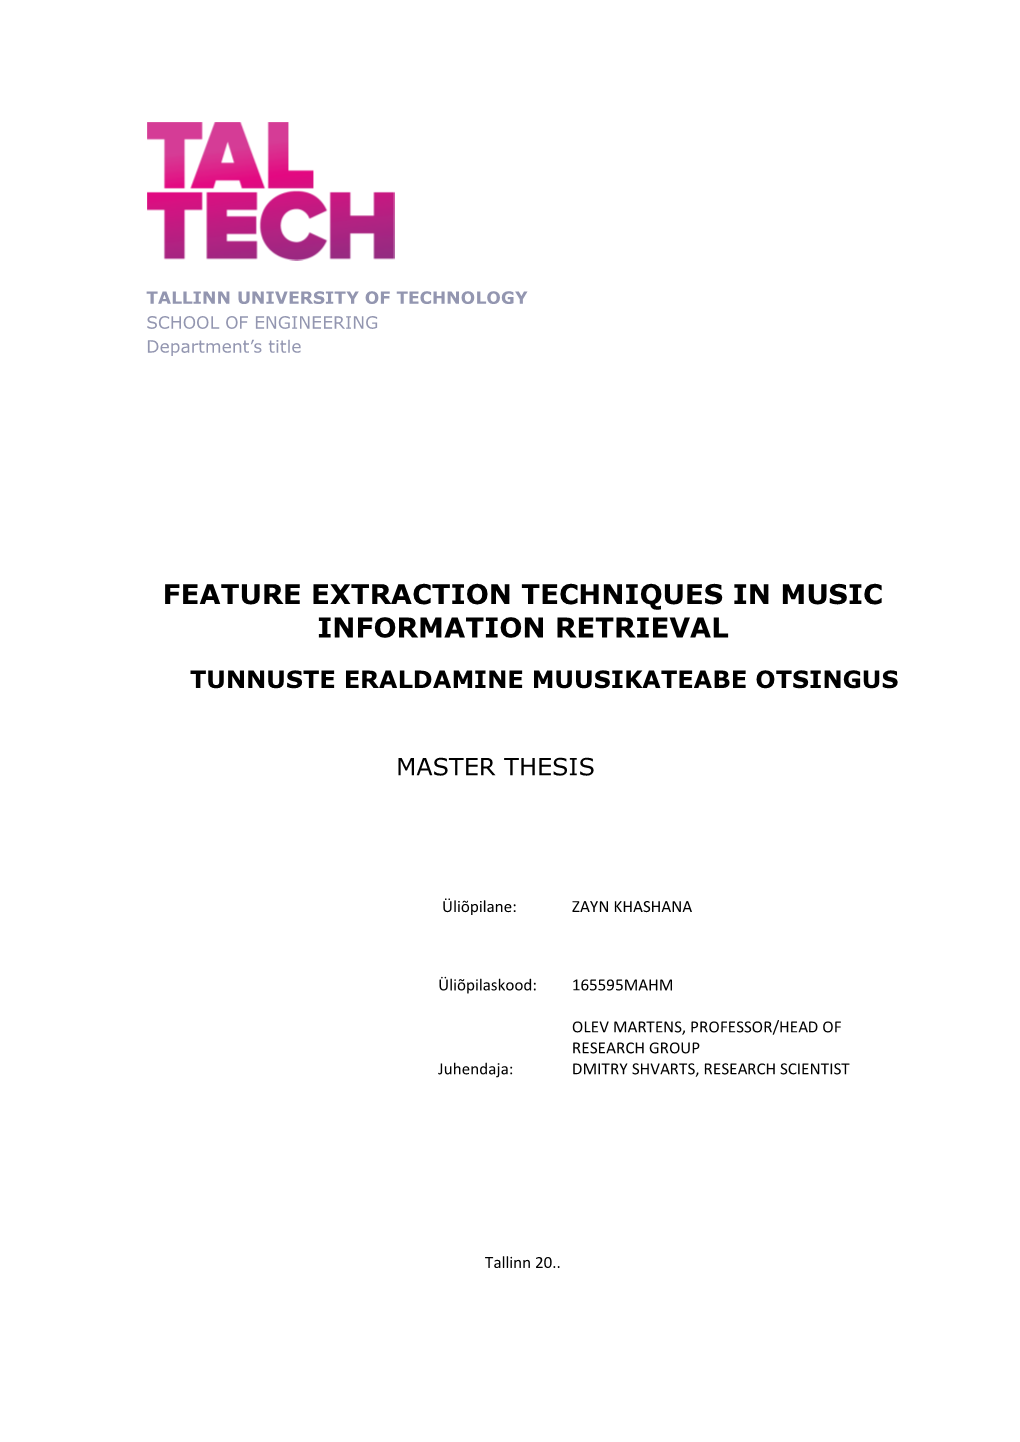 Feature Extraction Techniques in Music Information Retrieval